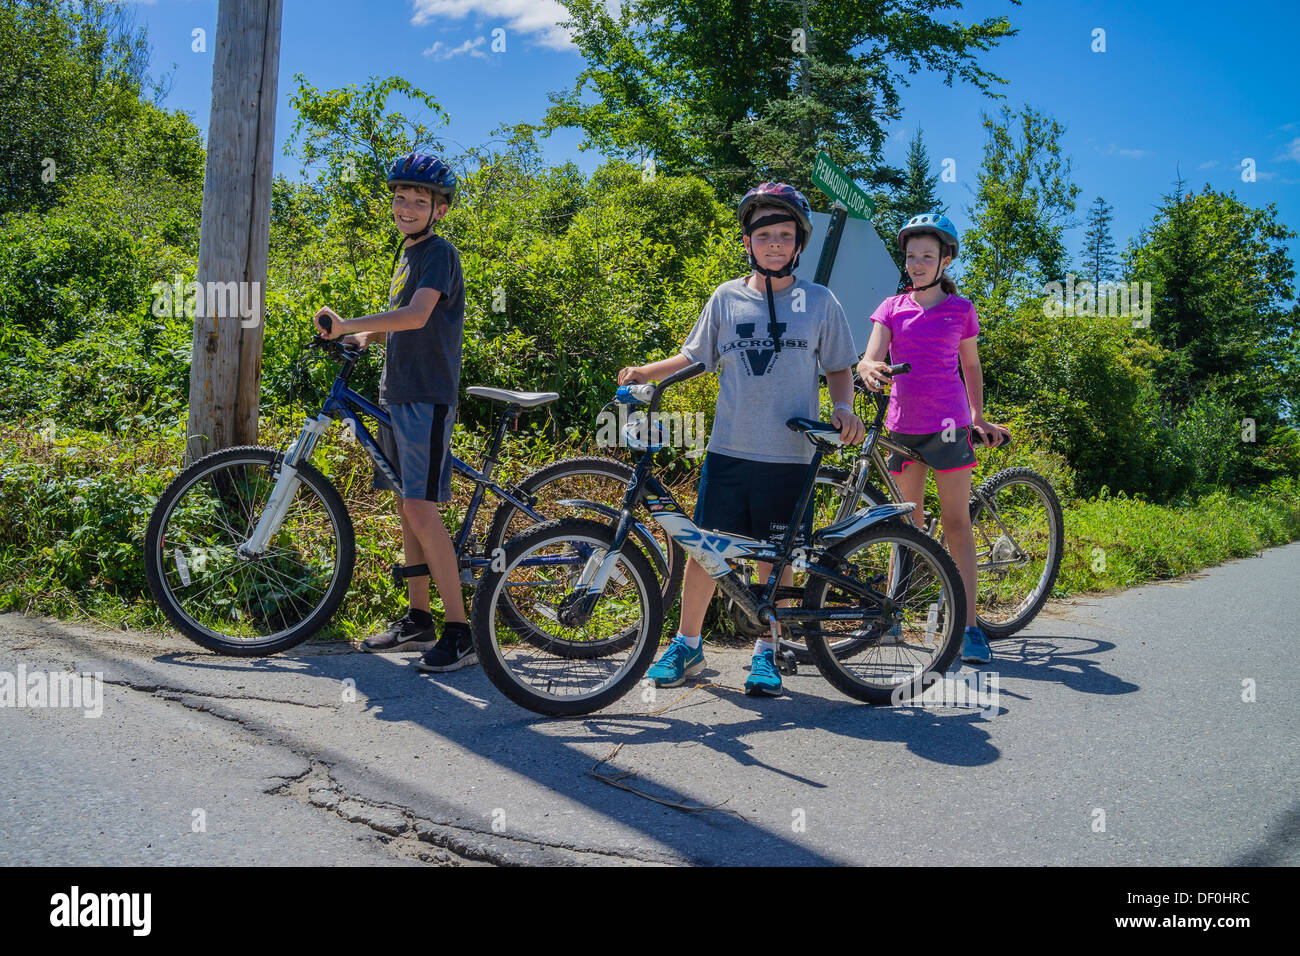 Two 12-13 year old boys and one girl stop for a moment and stand by their bikes during their summer break from school. Stock Photo